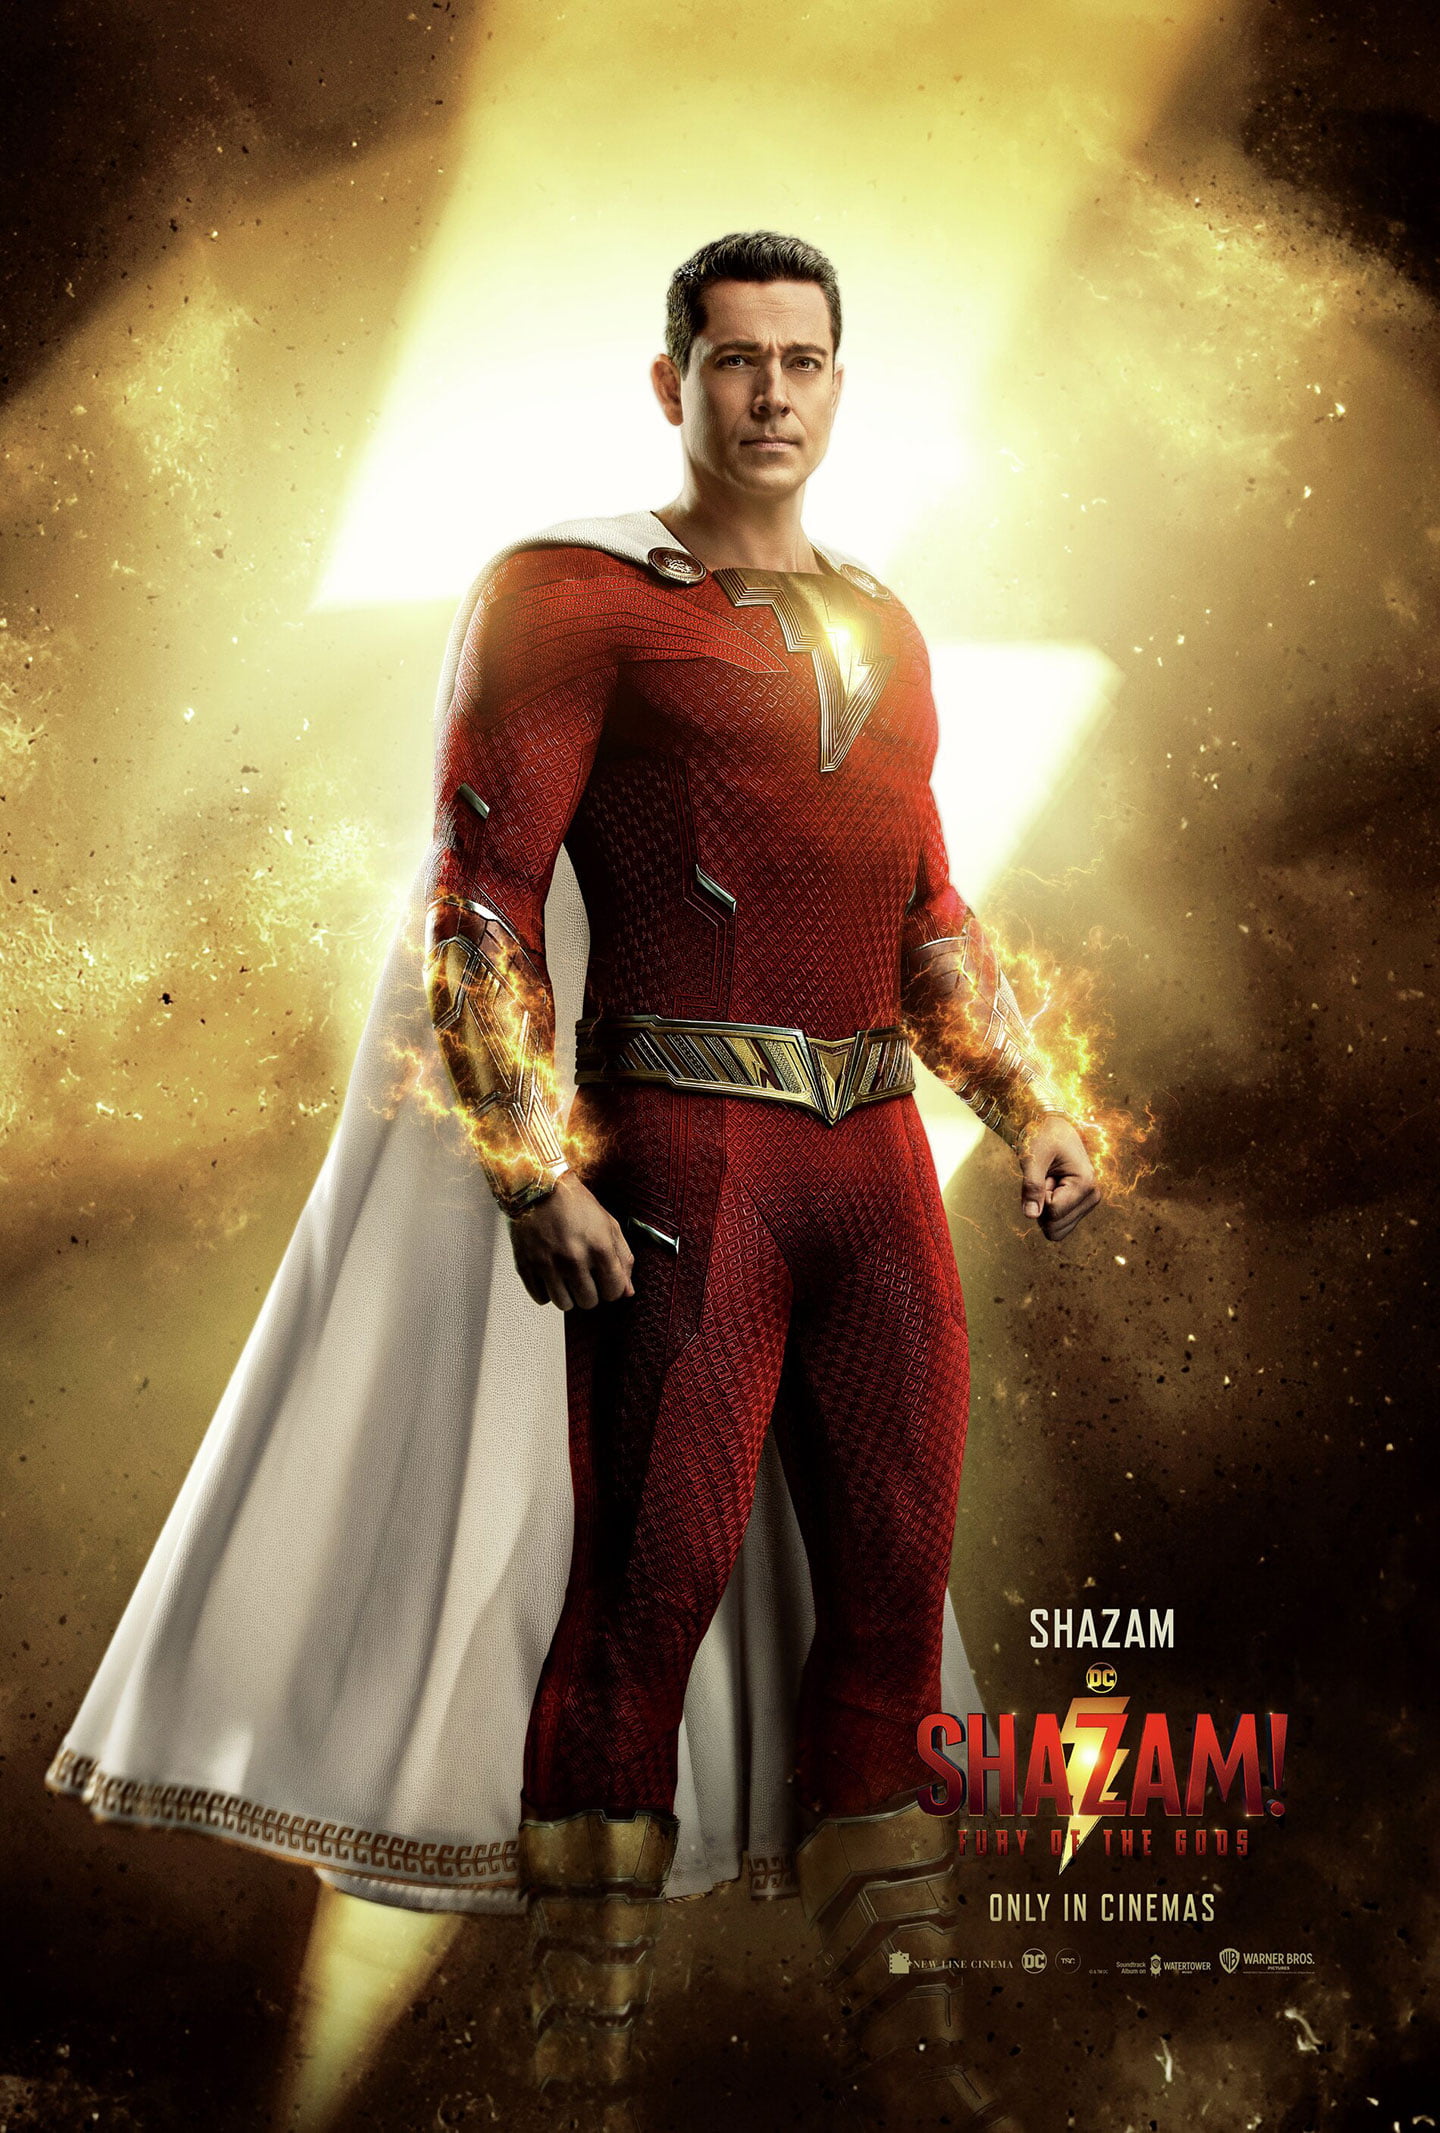 Shazam! Fury of the Gods Poster For ScreenX Revealed [Exclusive